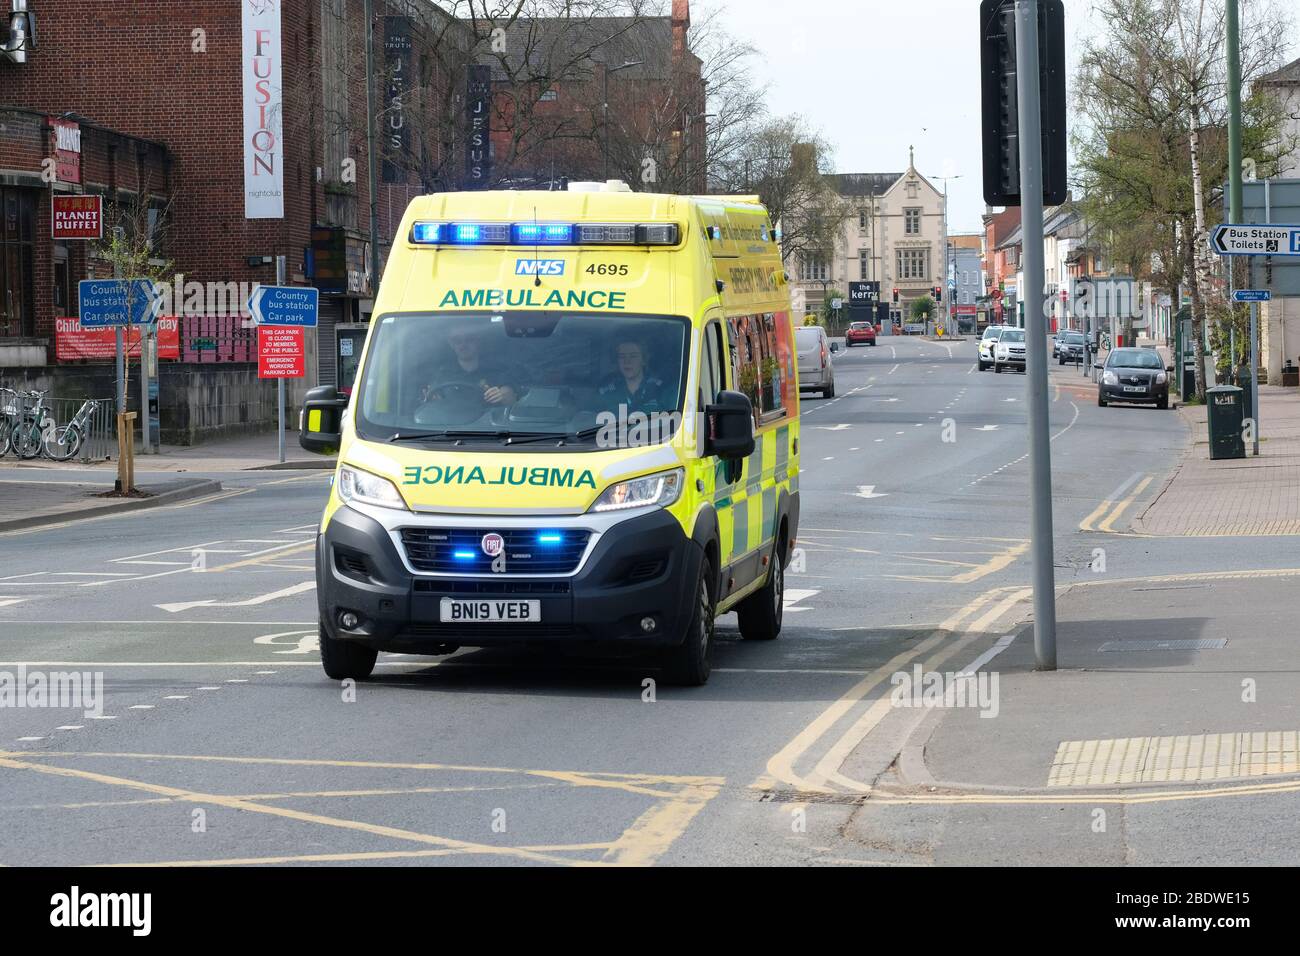 An emergency ambulance with blue lights flashing on near empty roads during the Coronavirus lockdown in Hereford UK Stock Photo